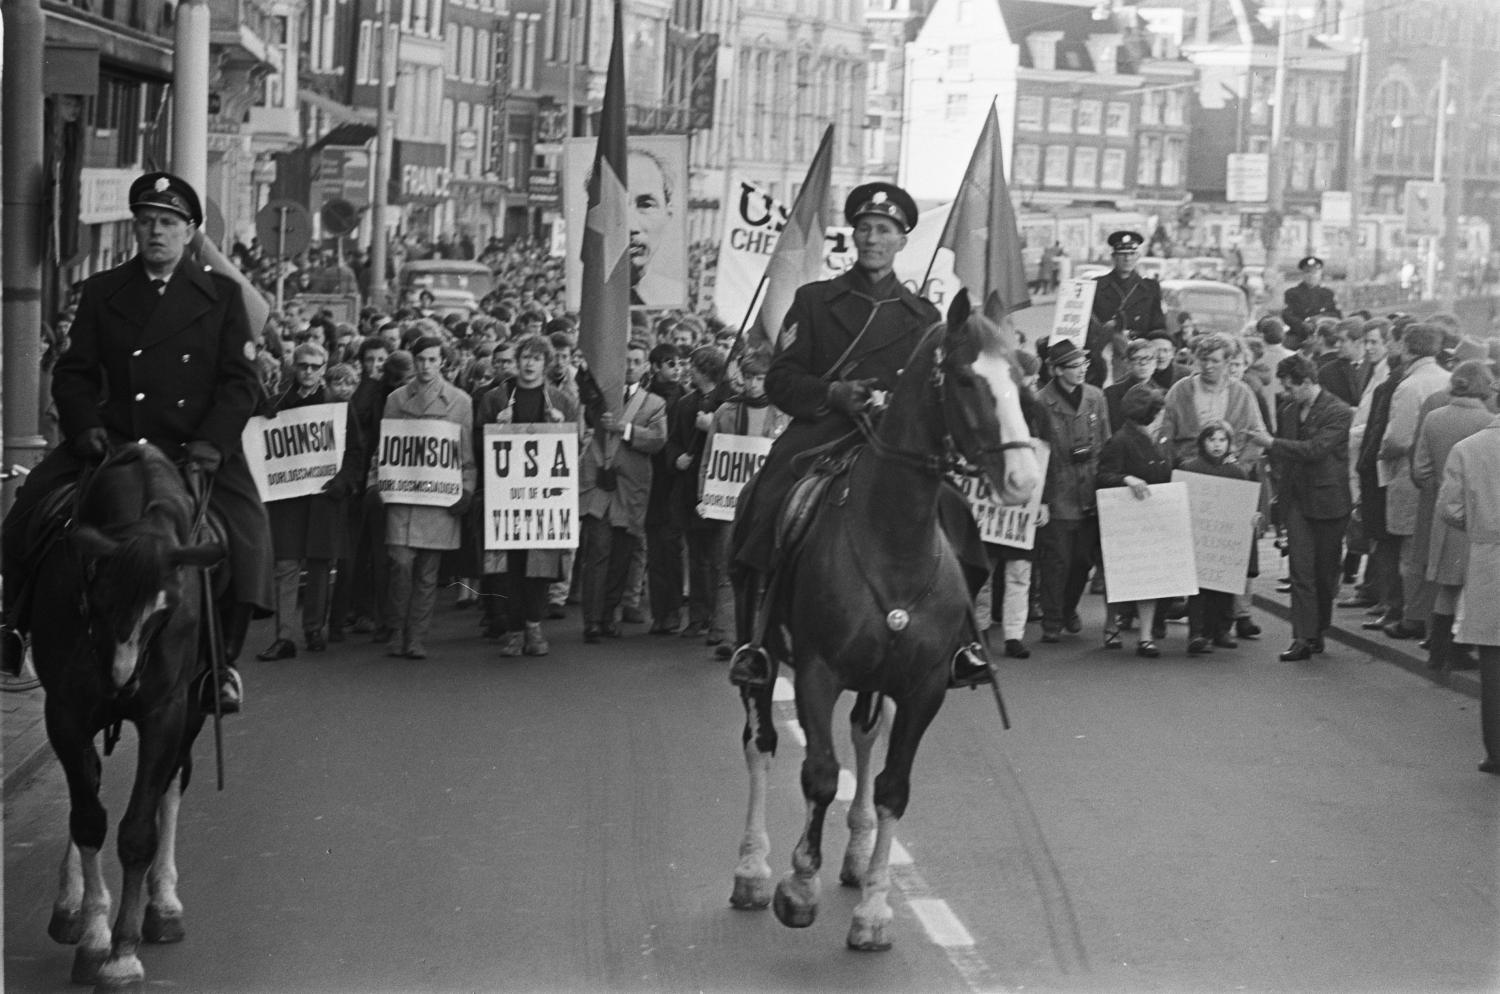 Anti-American demonstration in Amsterdam, 16 March 1968. Photo by Nijs, Jac. de / Anefo | Nationaal Archief